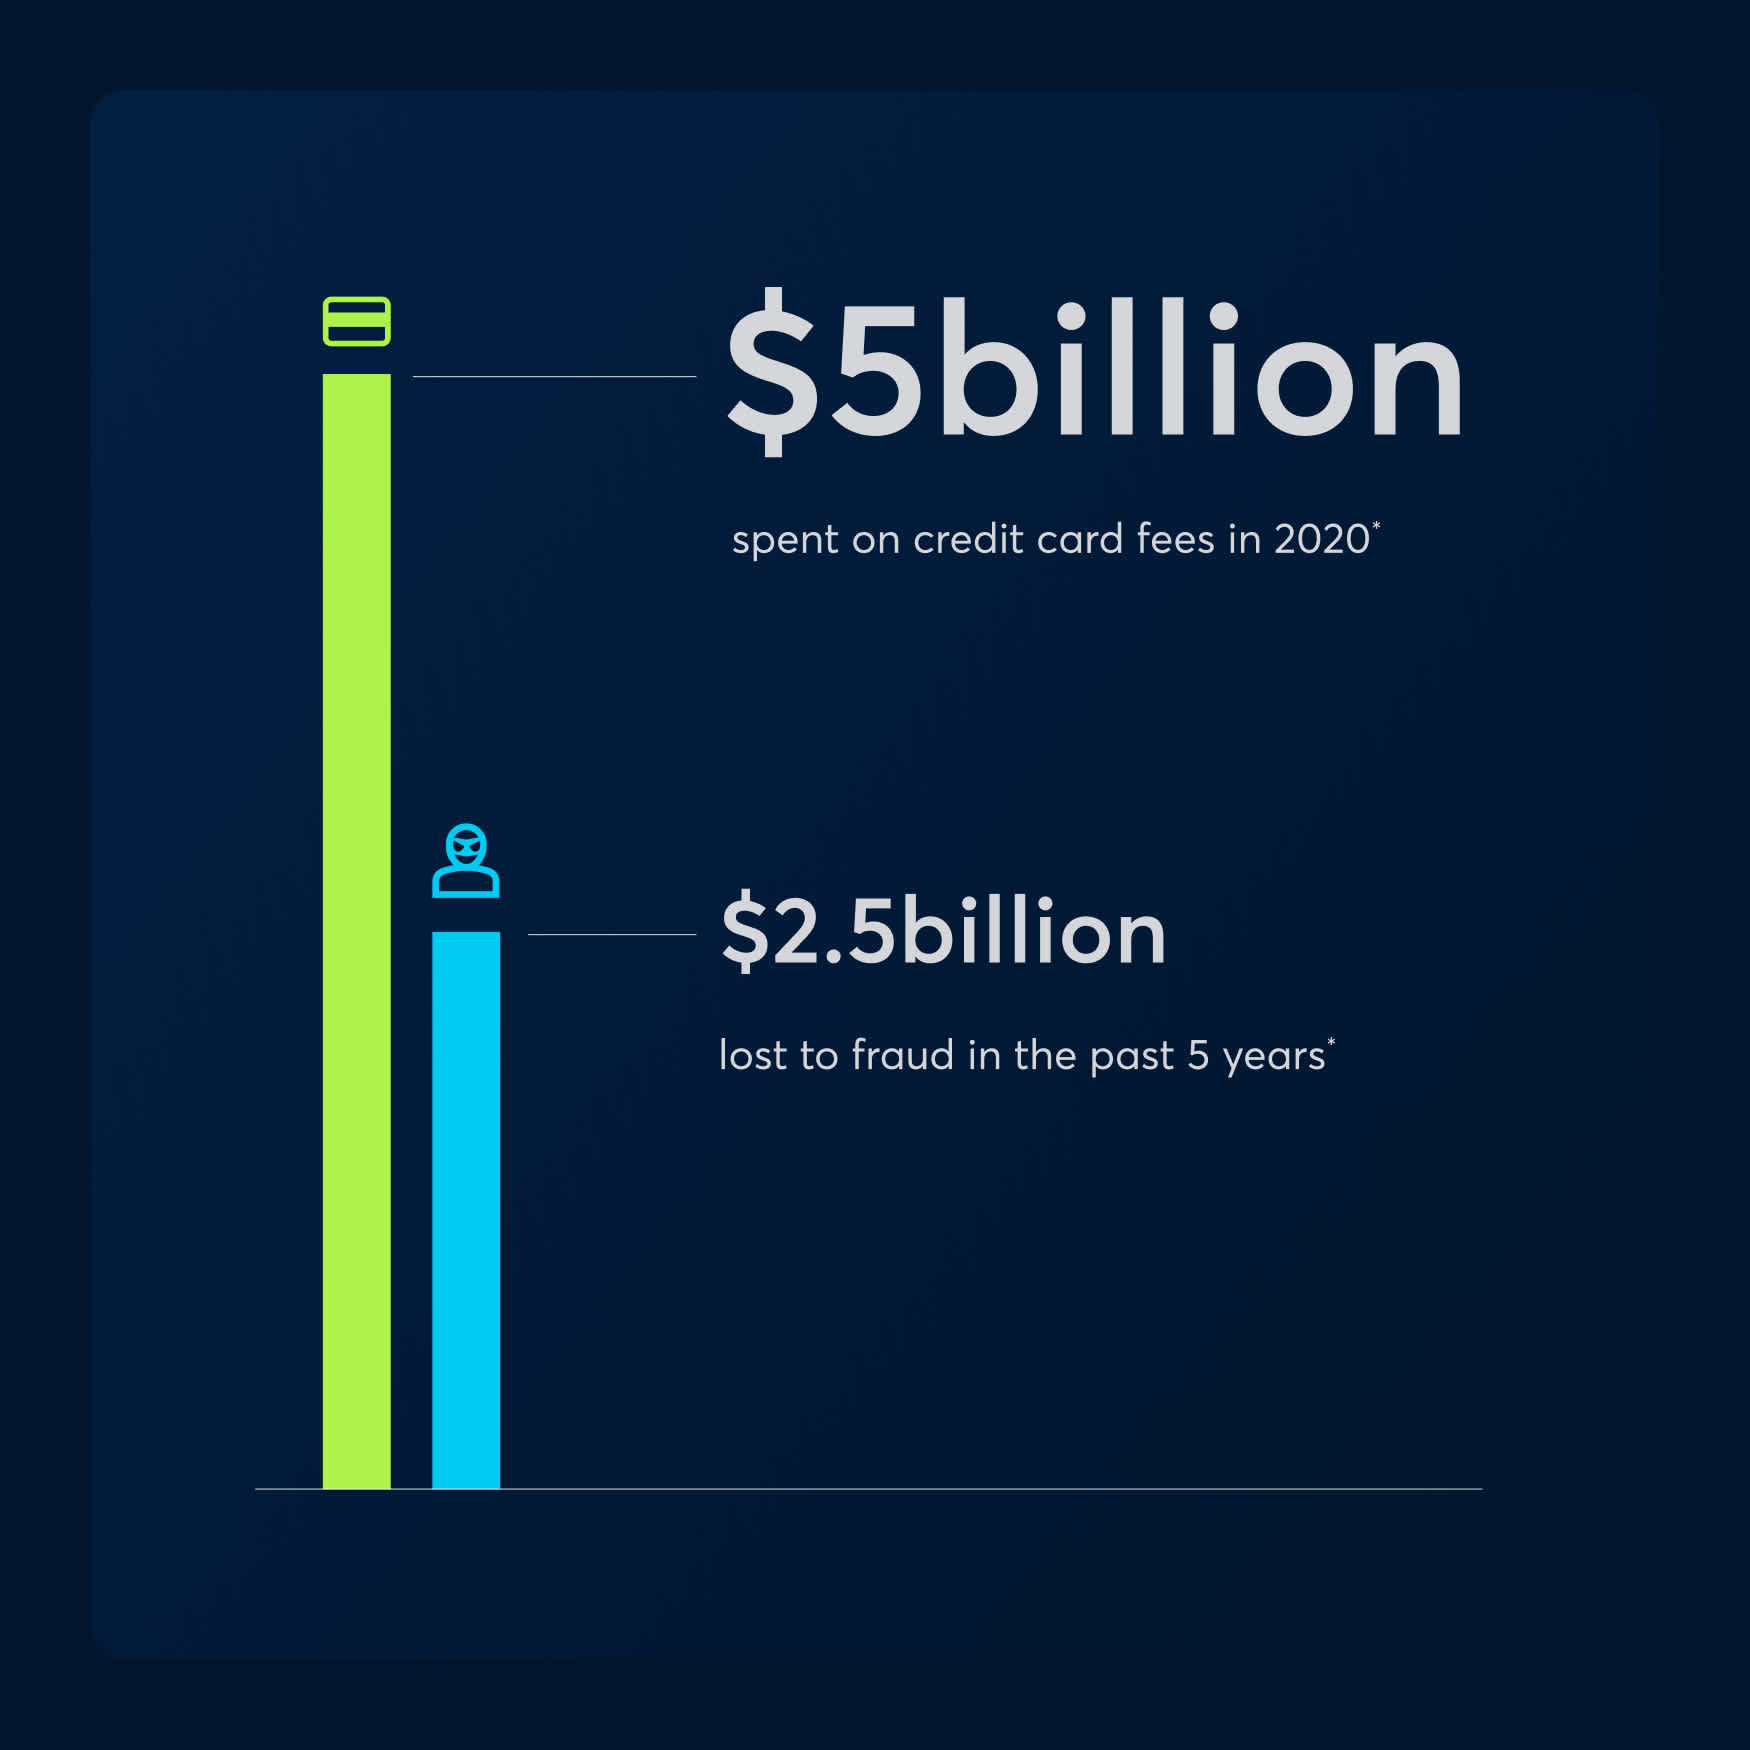 Merchants spent $5b on credit card fees in 2020*